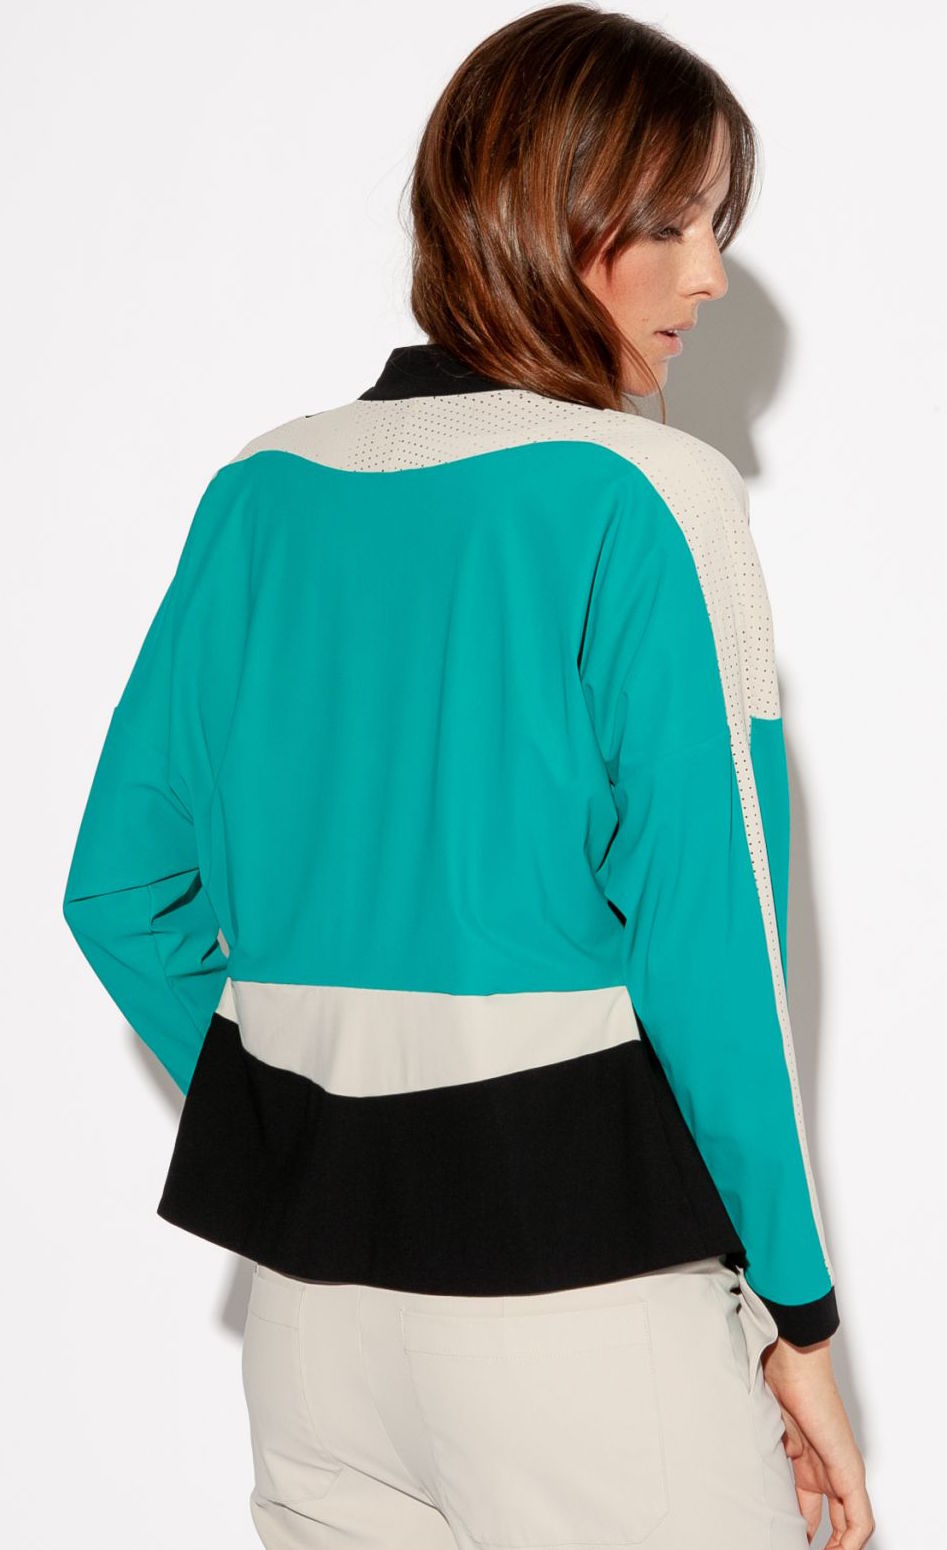 Back top half view of a woman wearing the Indies Nano Jacket. The back of the jacket has black bottom panel, a seafoam blue back, and pebble/beige perforated shoulders.